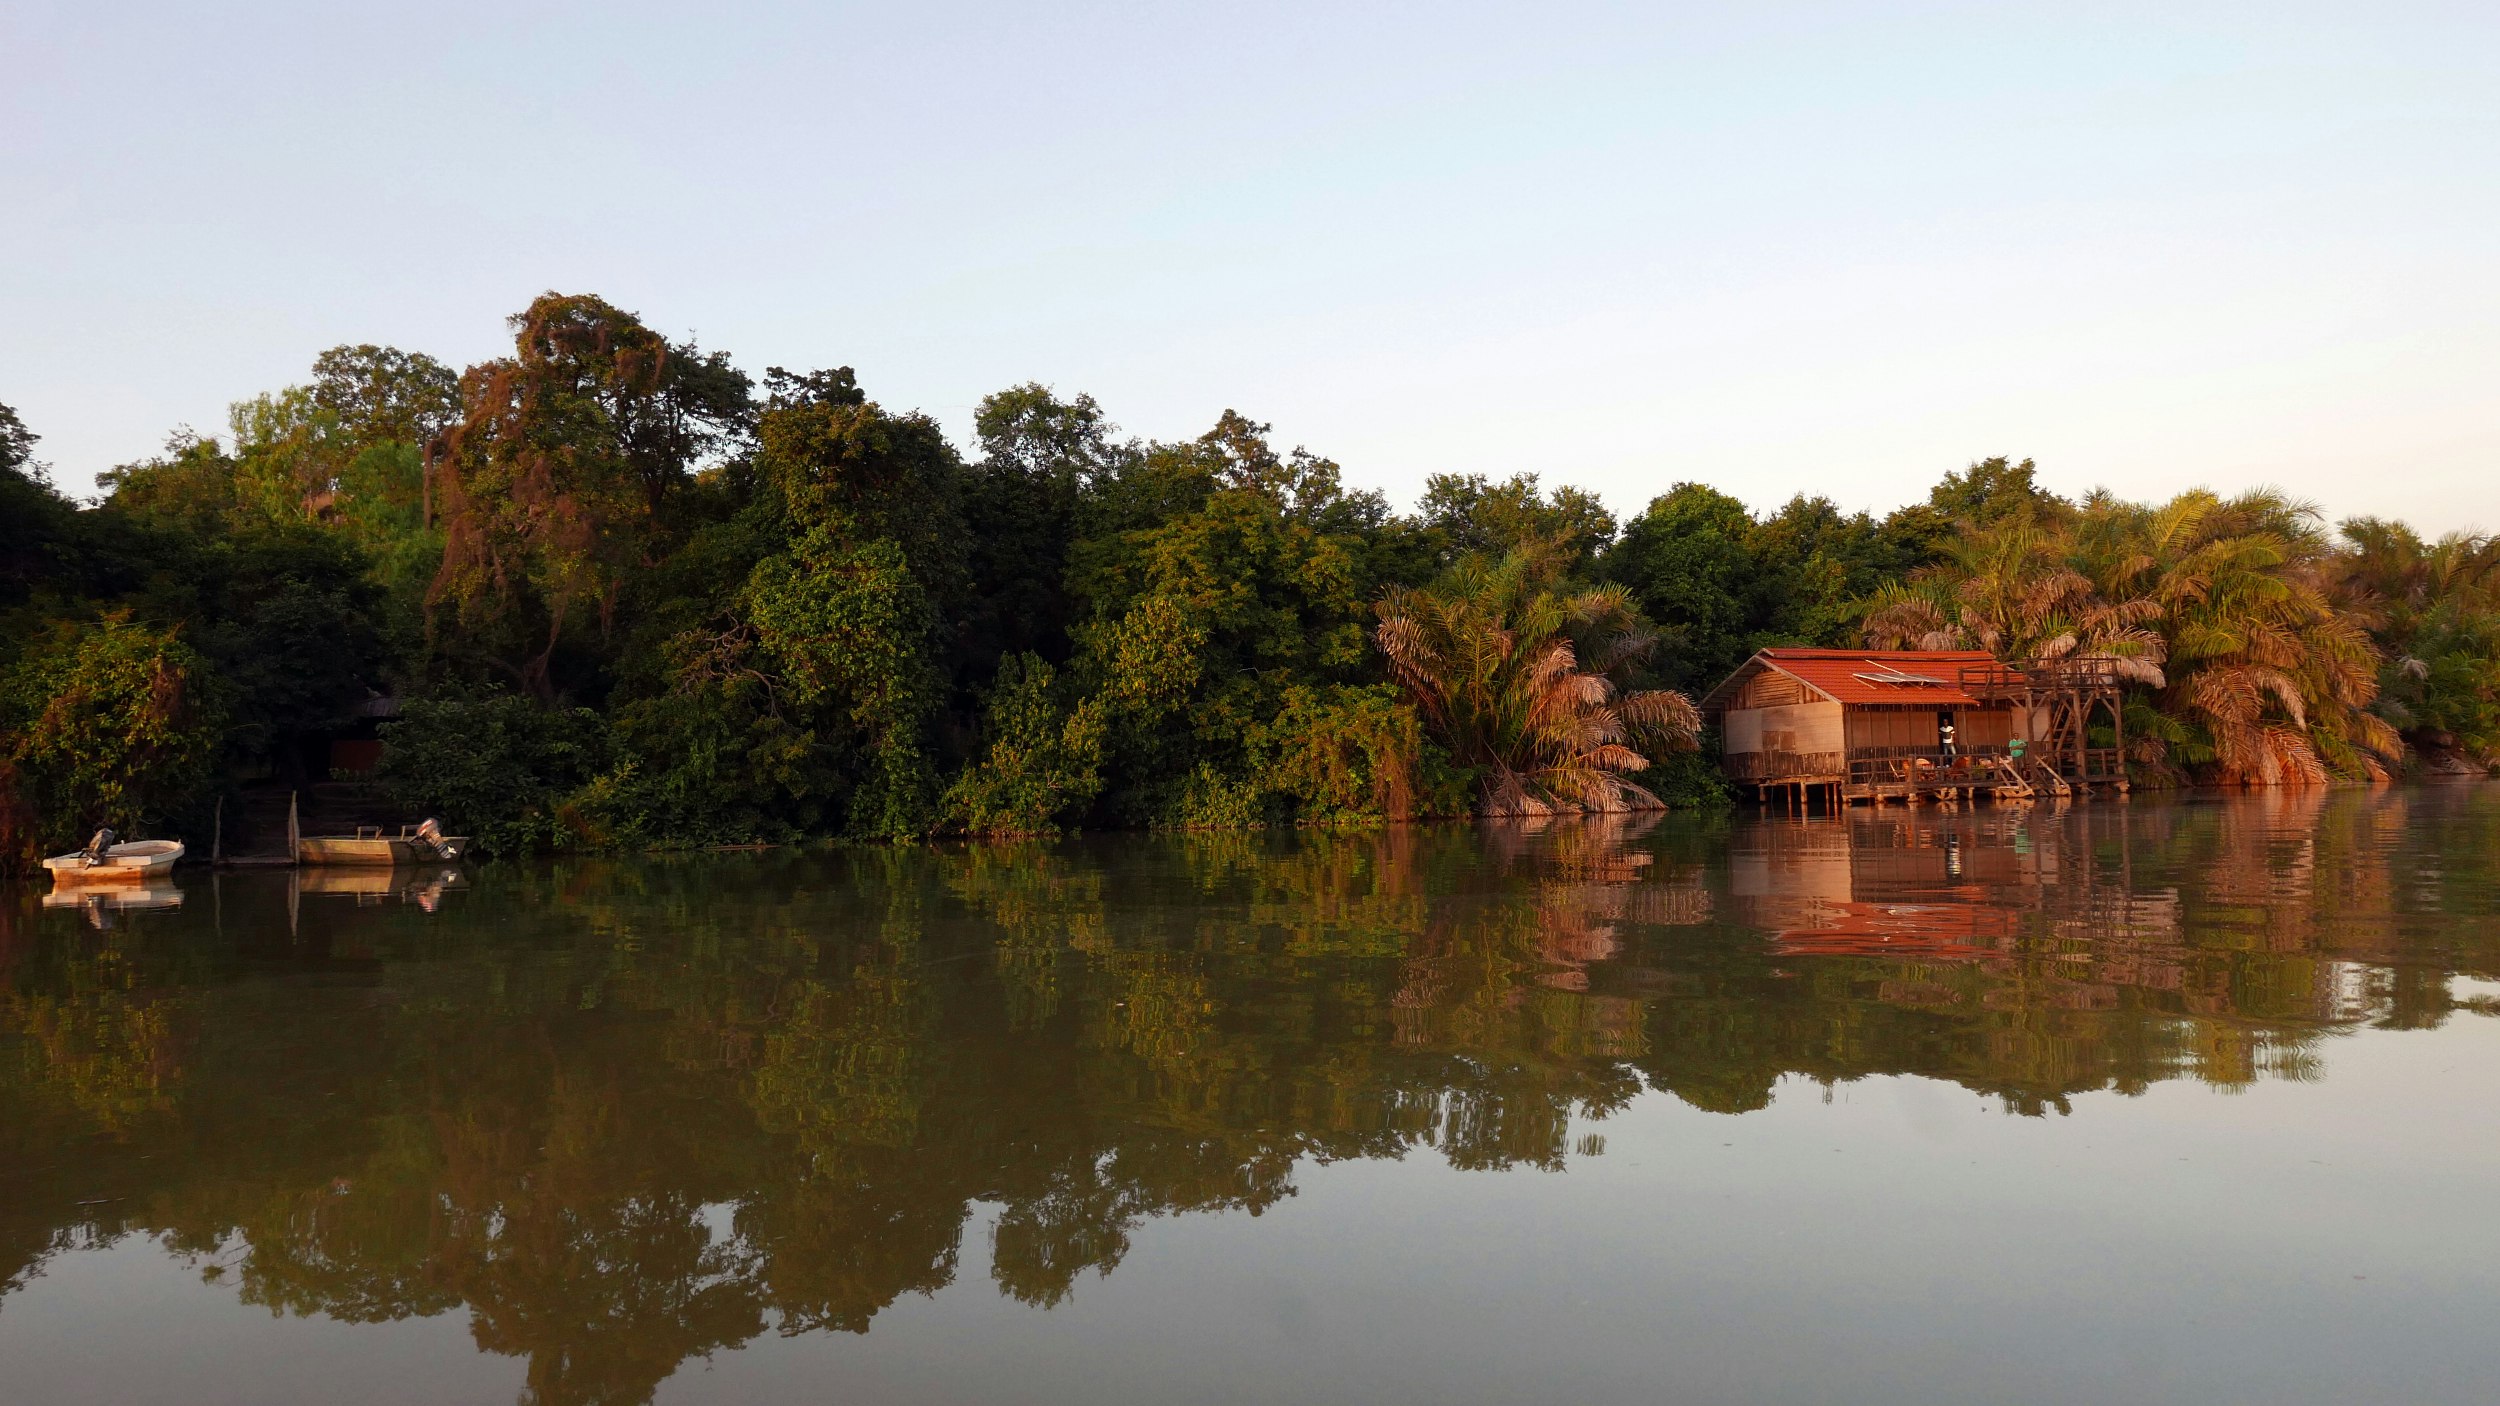 A forested section of riverbank reflects in the mirror-like surface of the River Gambia; nestled into the trees is a red-tinned roof wooden building - nearby are a couple of small boats moored on shore.